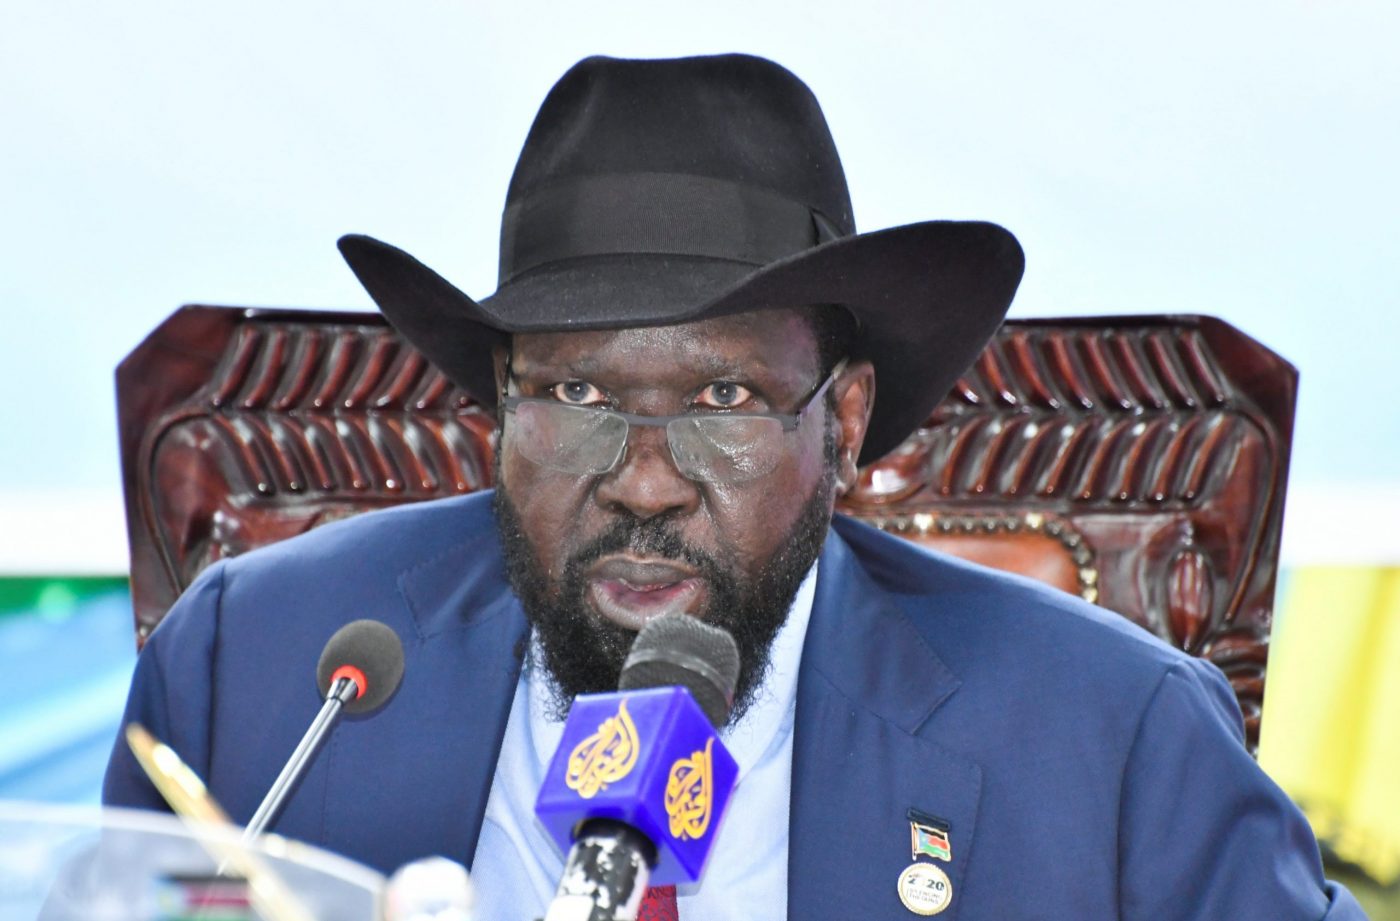 Kenya apologises to Kiir after Biar’s ‘inappropriate’ remarks